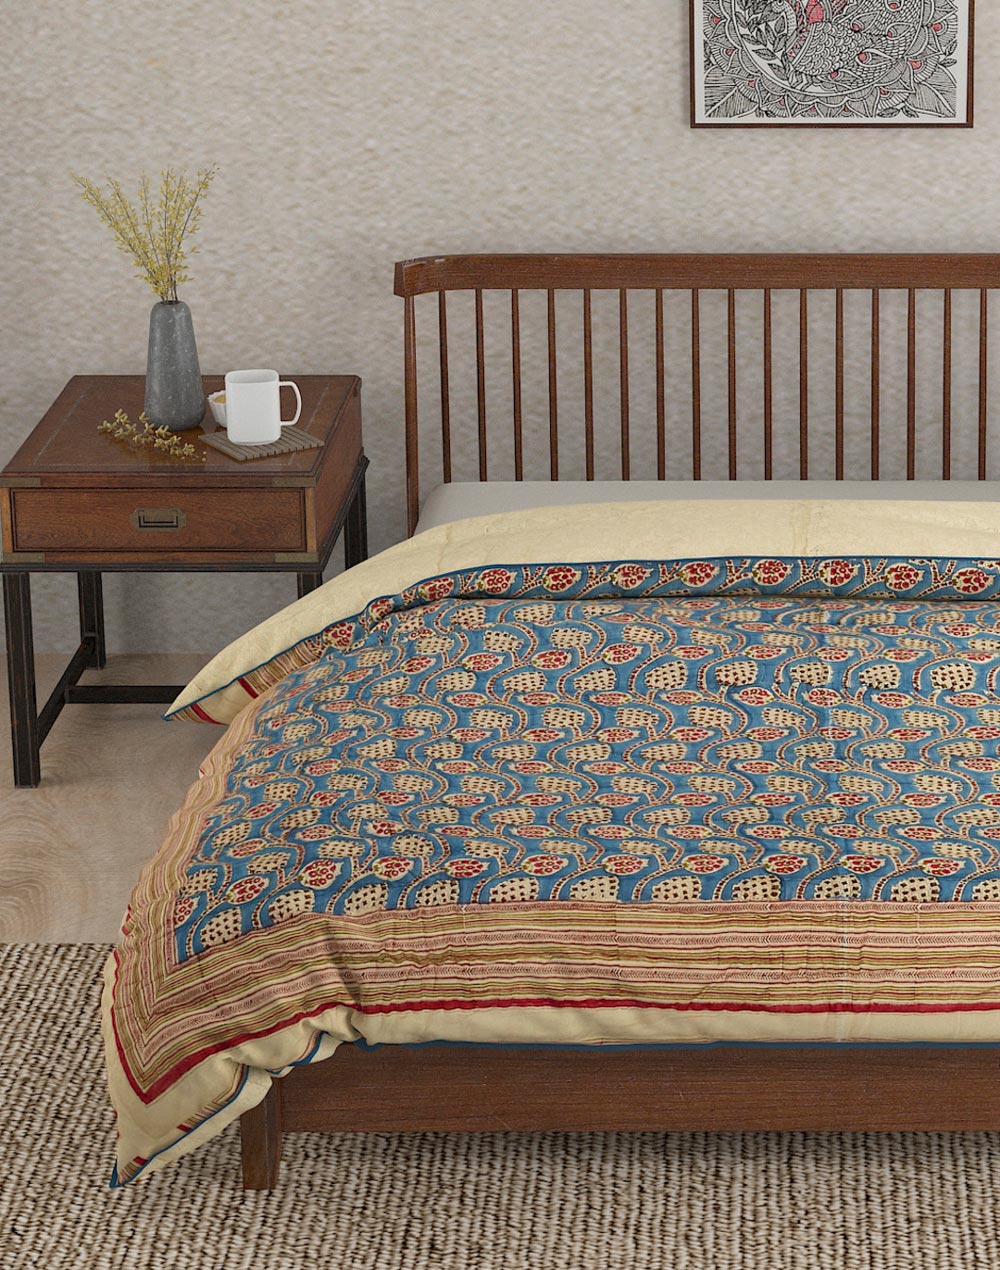 Quilts & Rajai: Buy Quilts Online at Best Prices in India